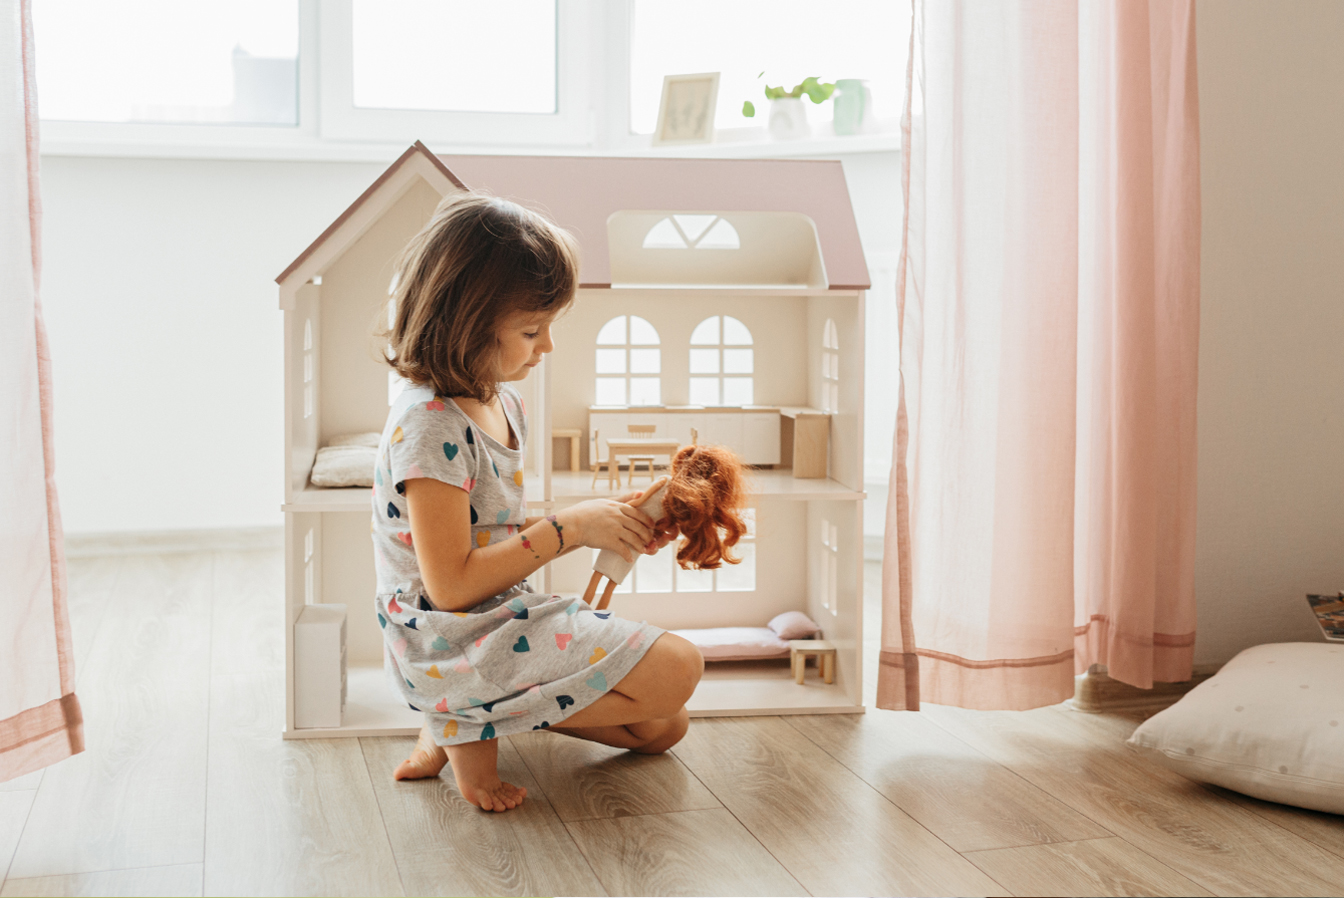 Girl sitting on floor, playing with her doll and dollhouse